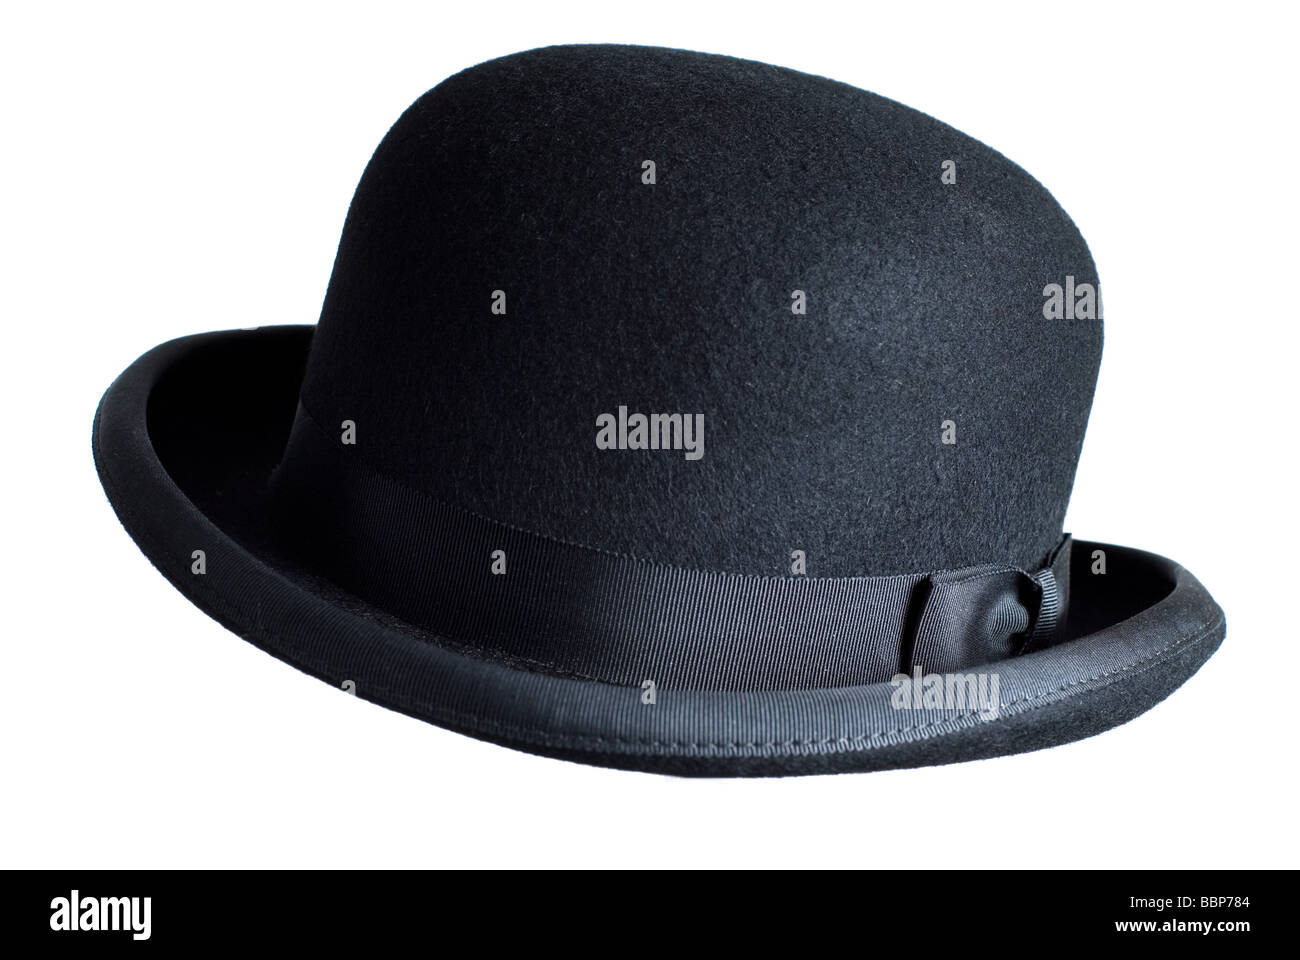 Black bowler hat as worn by english gentleman the city of london Stock Photo